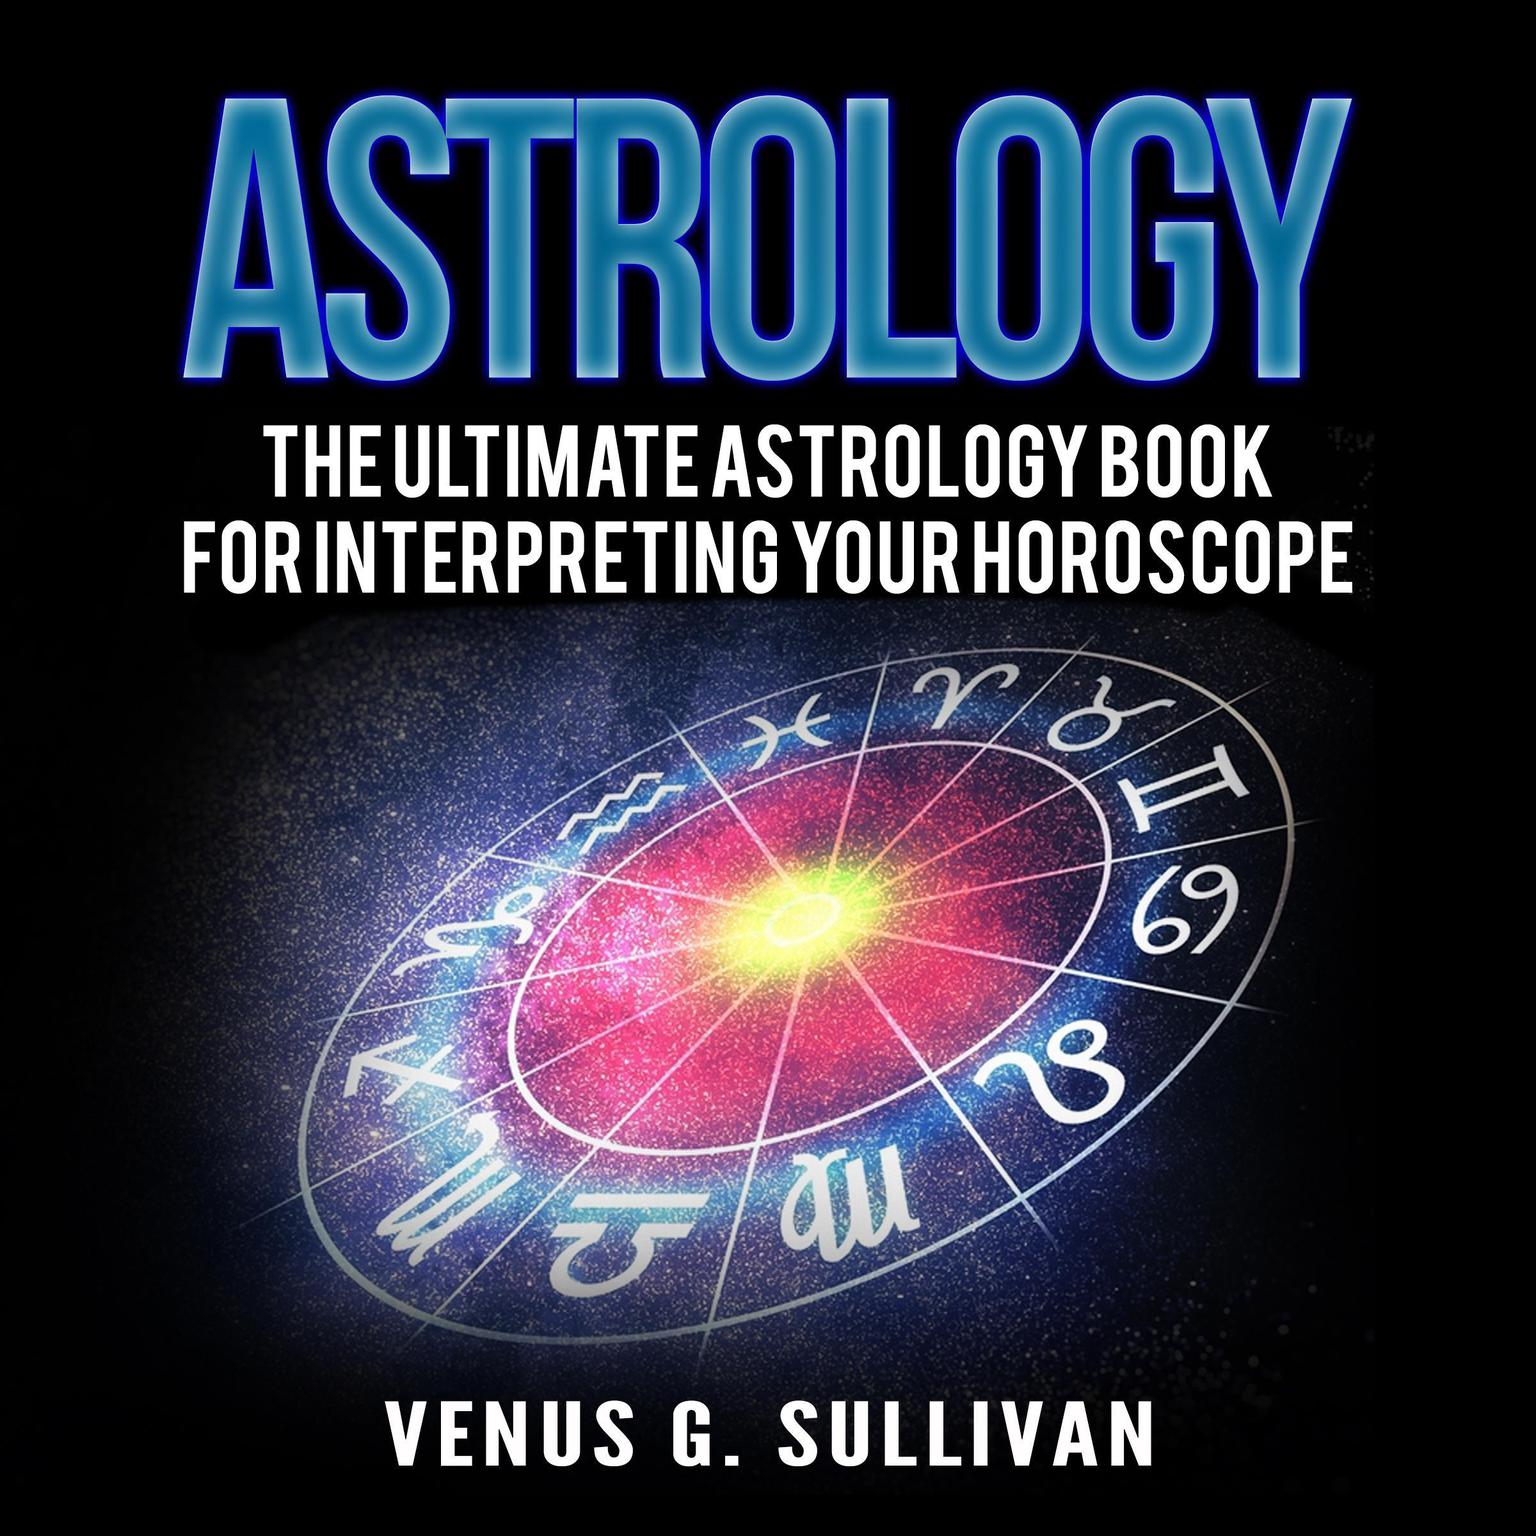 Astrology: The Ultimate Astrology Book for Interpreting Your Horoscope Audiobook, by Venus G. Sullivan